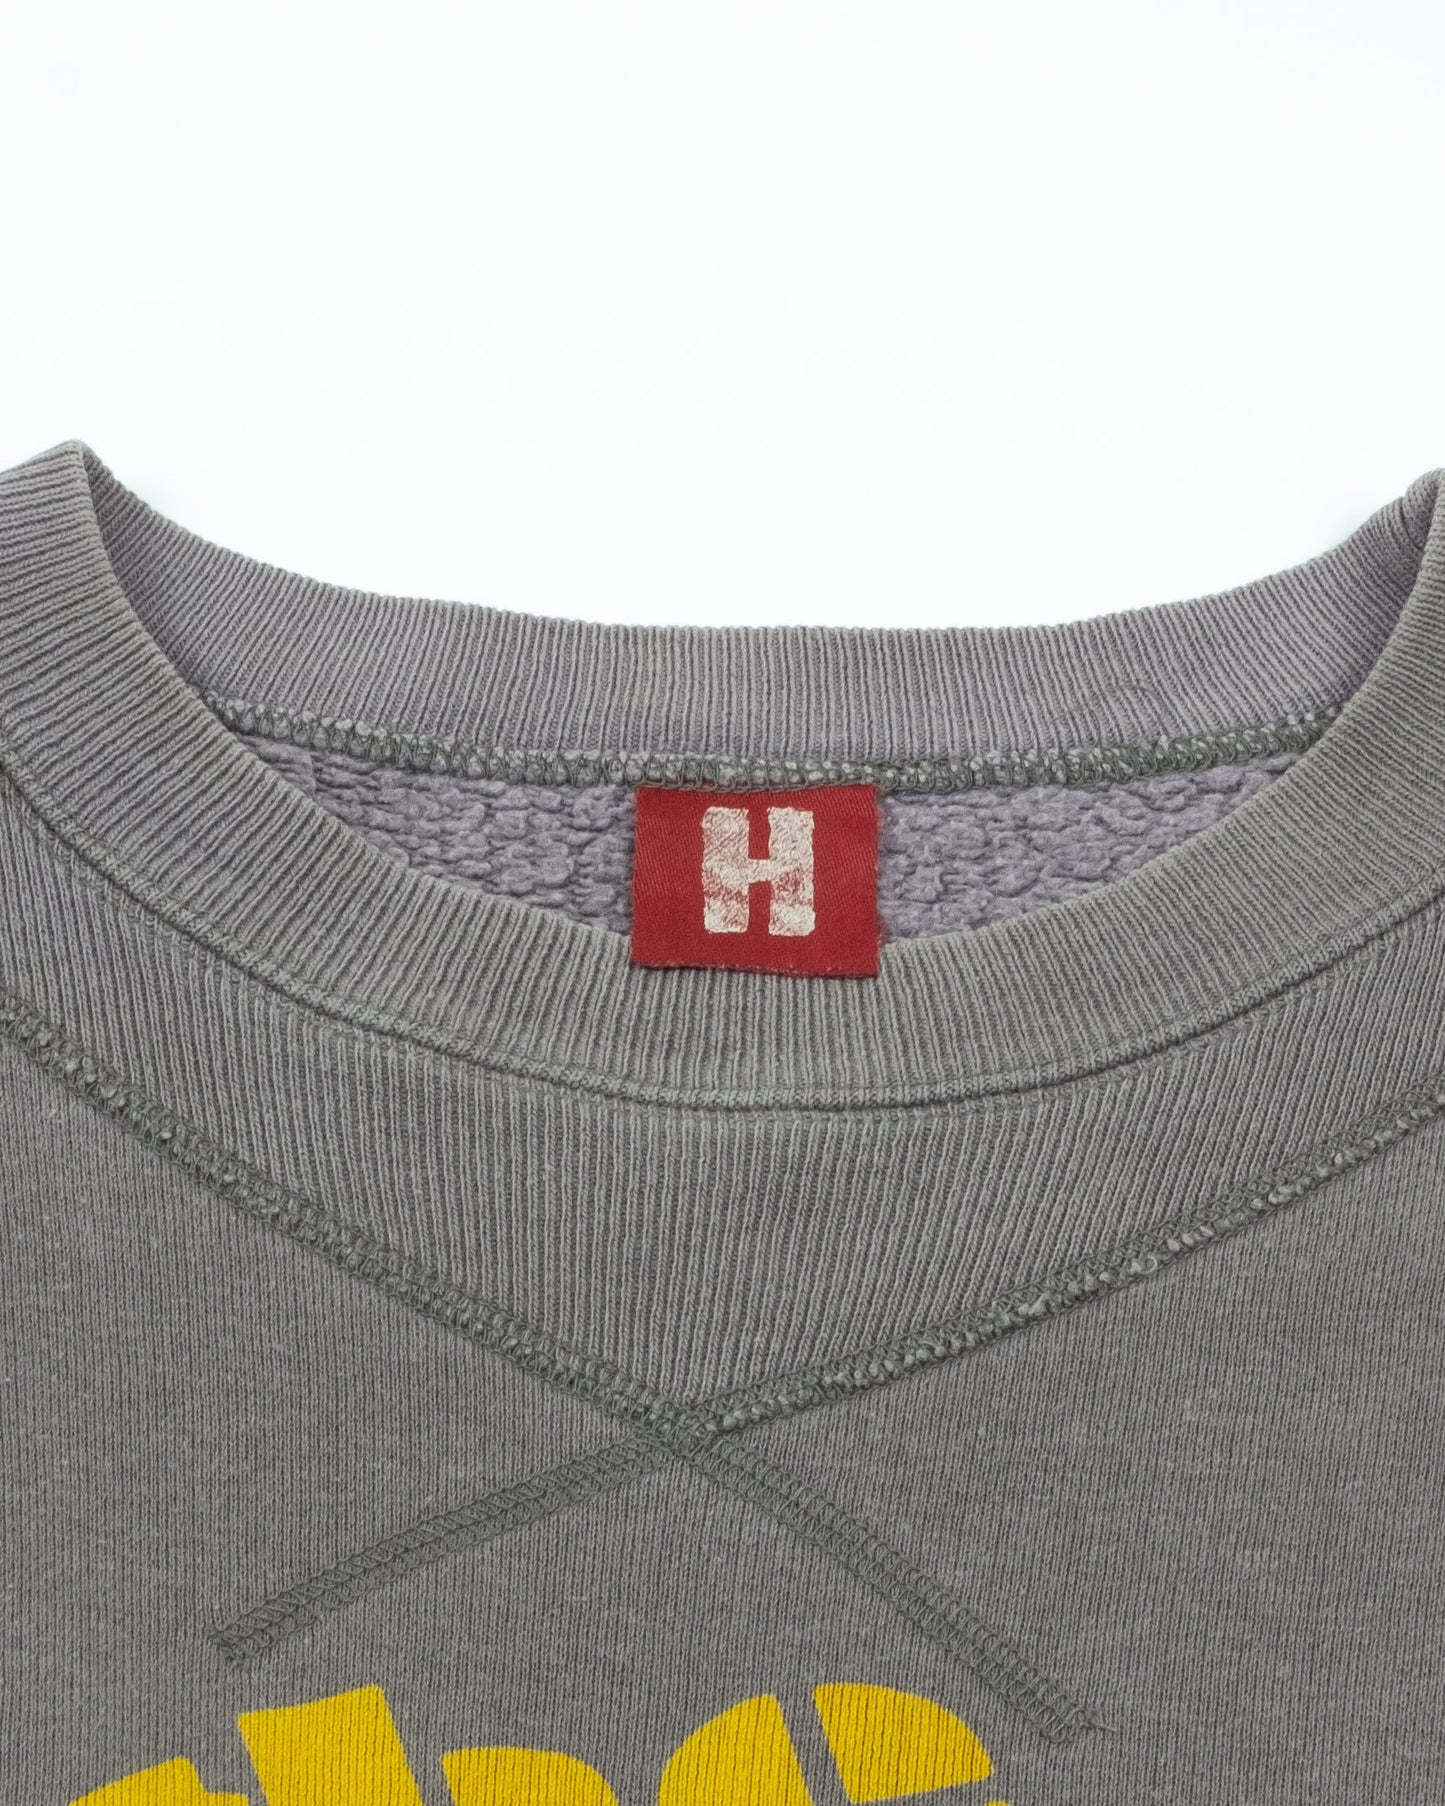 Hysteric Glamour Grey "The Hysteric Is In!" Sweatshirt